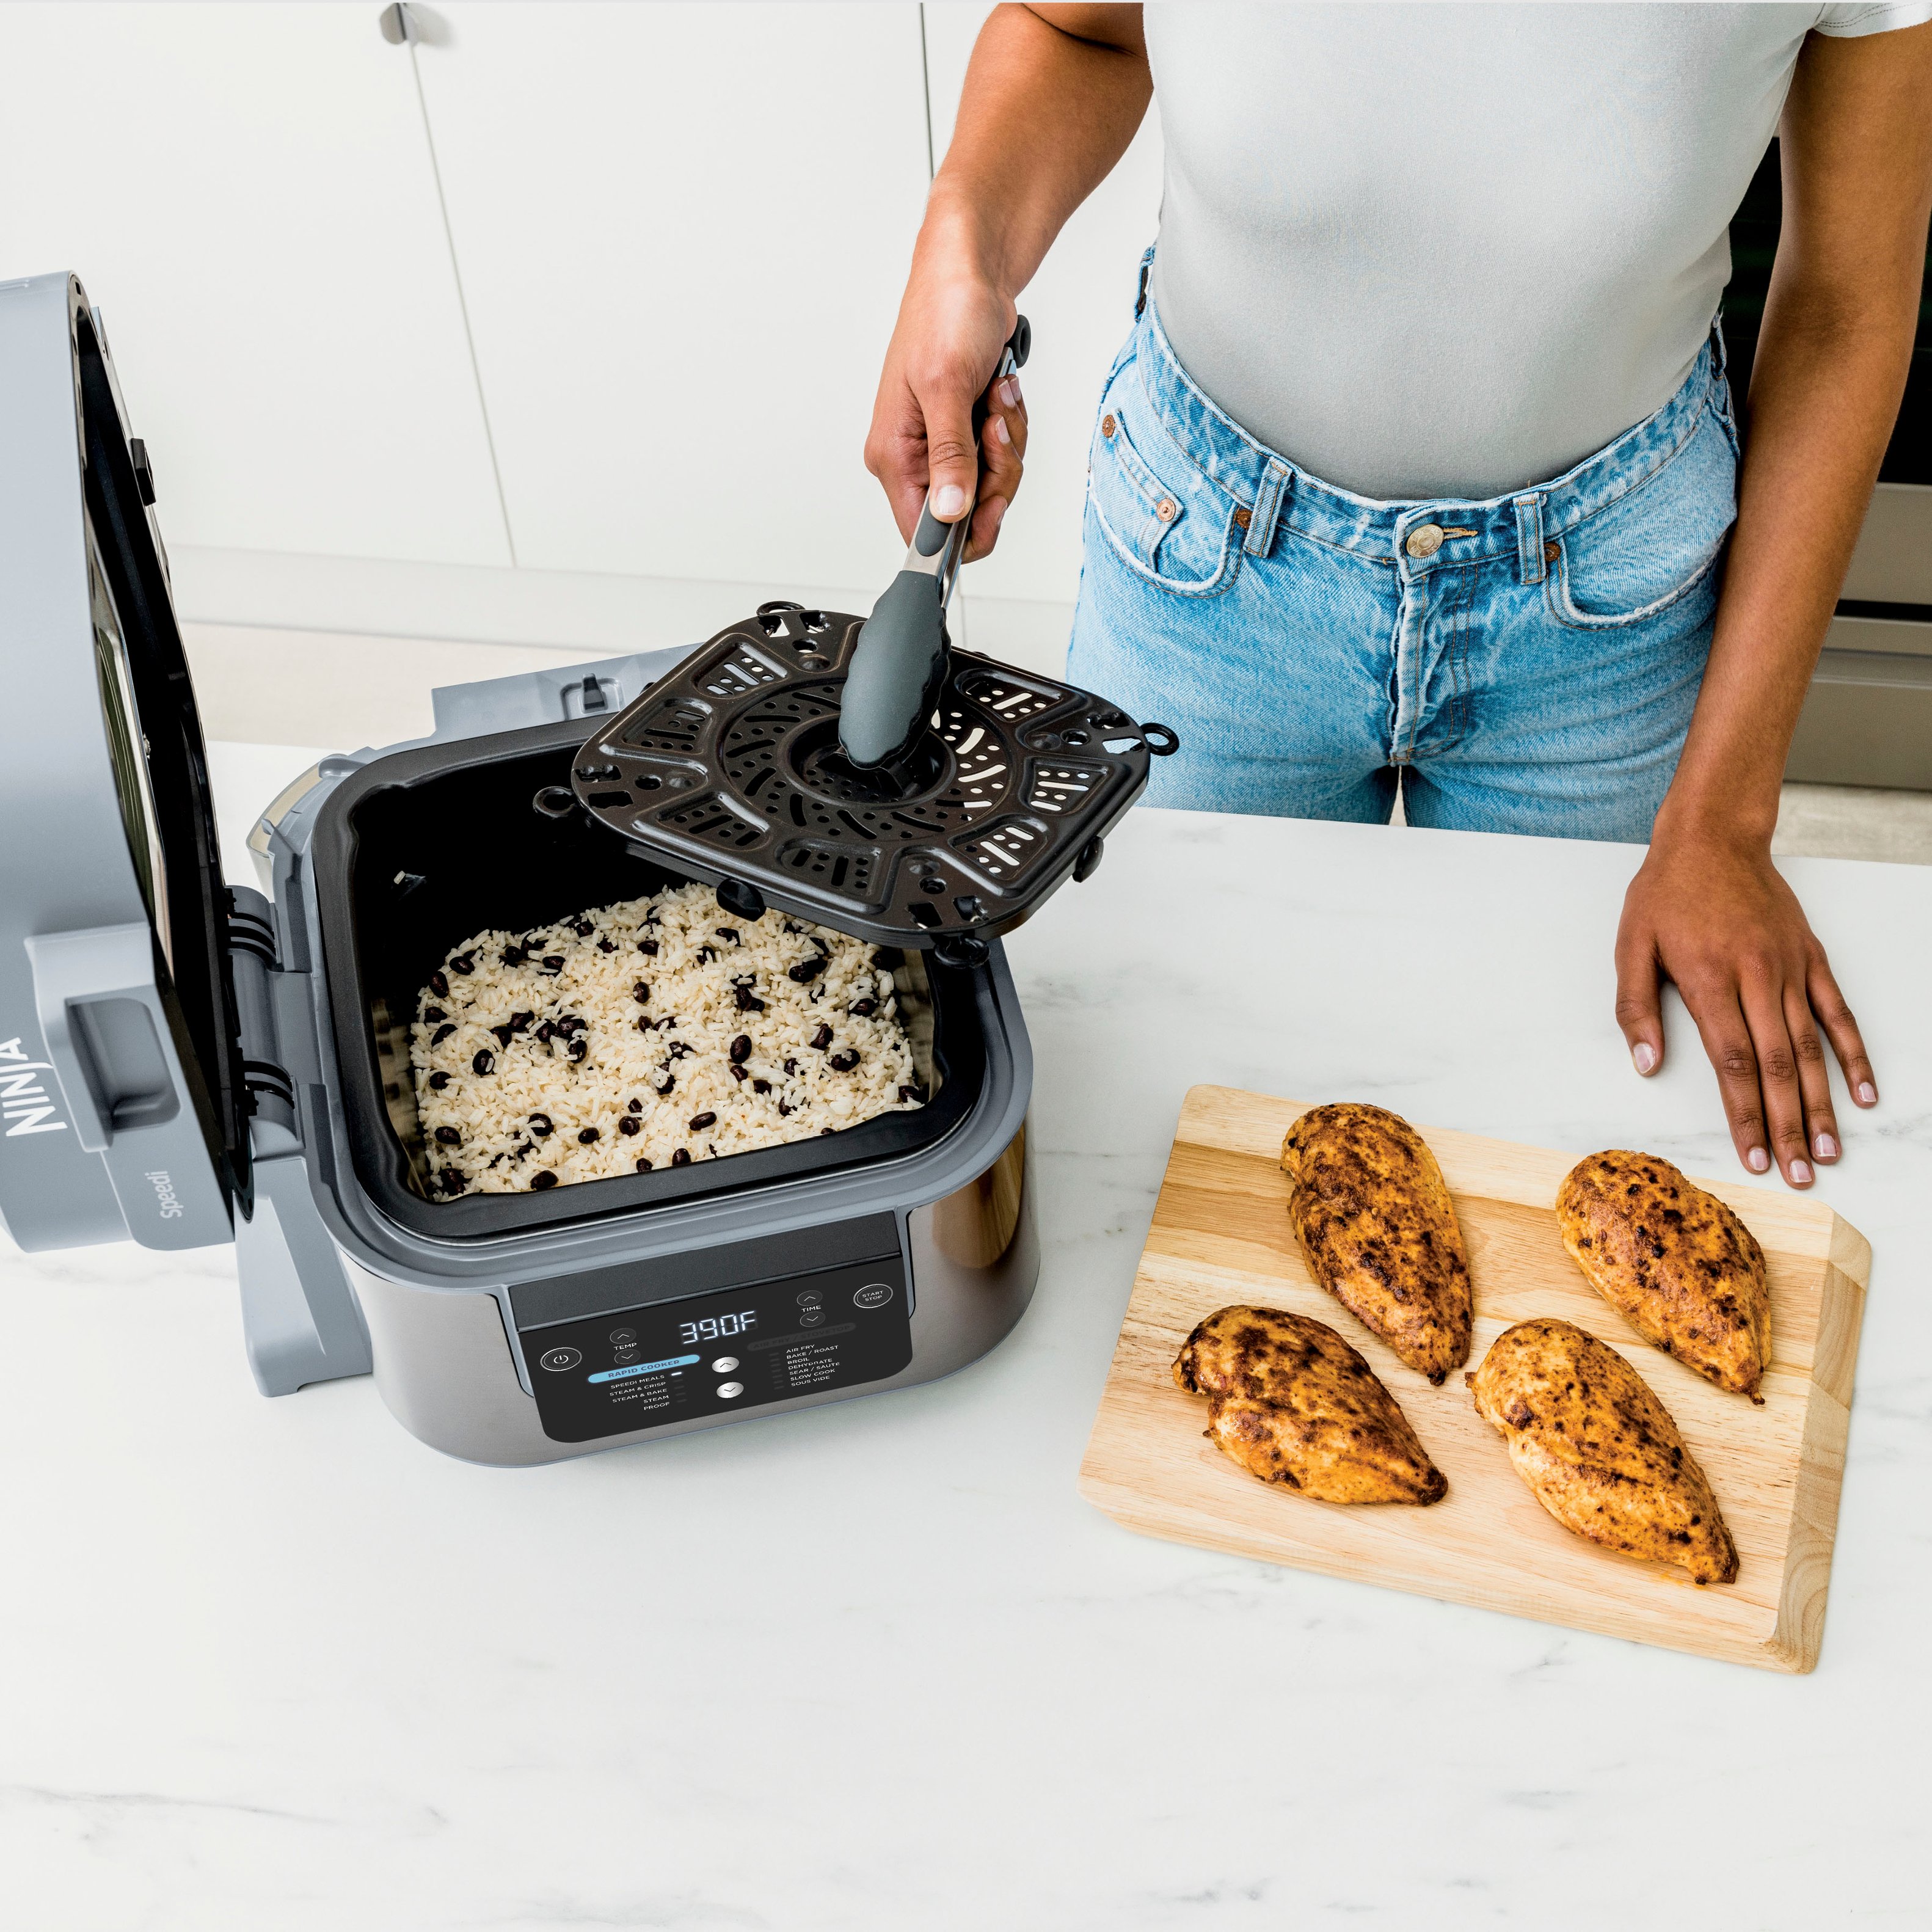 Ninja Combi™ All-in-One Multicooker, Oven, and Air Fryer Pressure